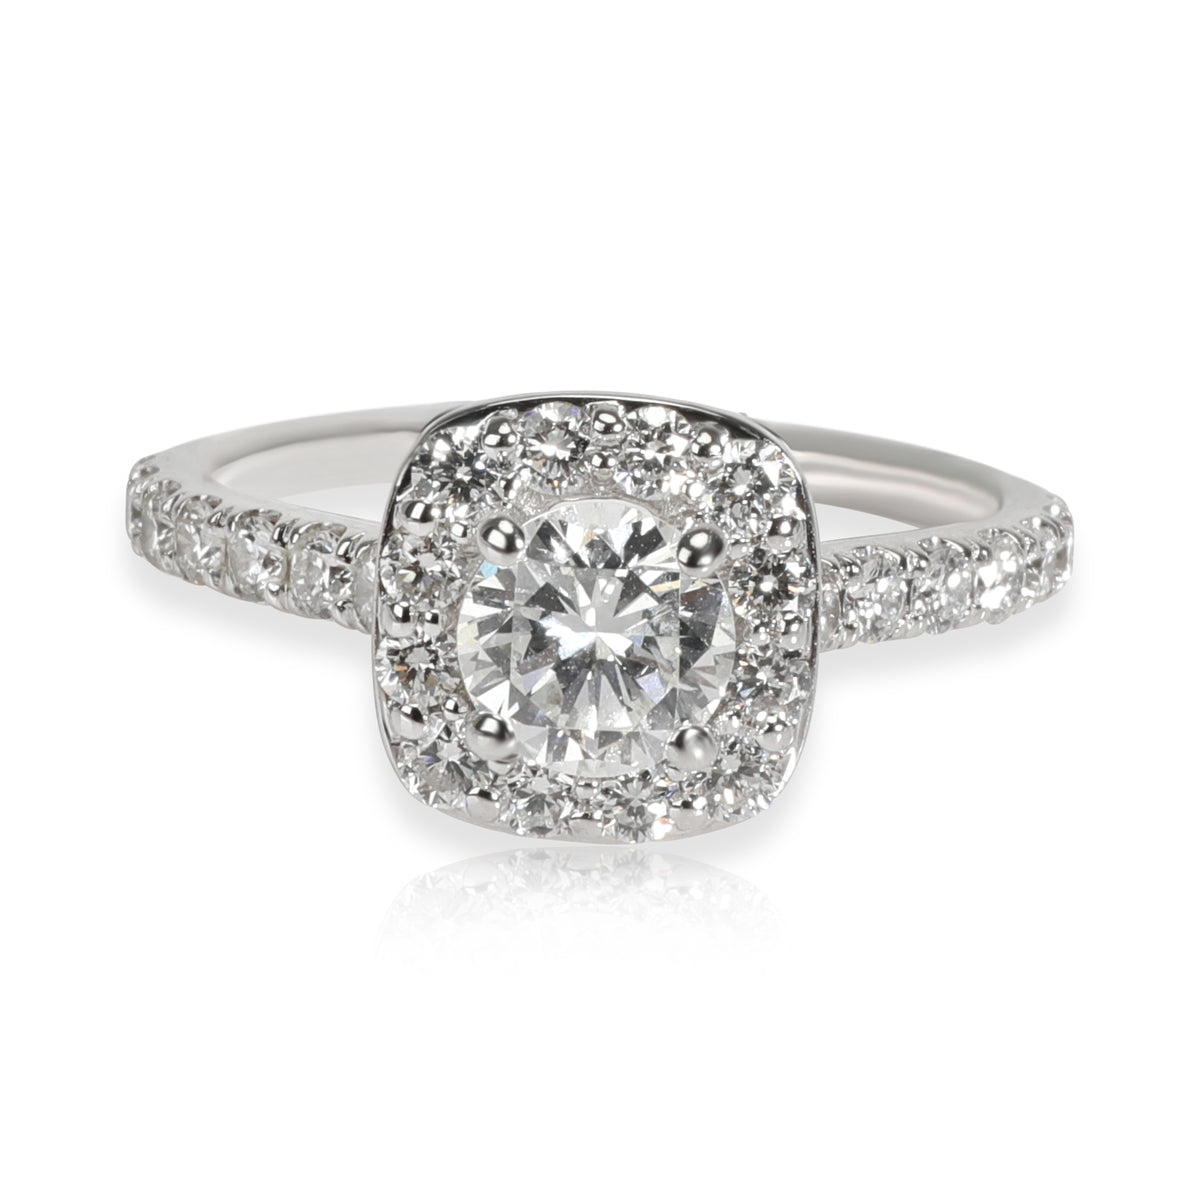 Gabriel & Co. Halo Diamond Engagement Ring in 18K White Gold G SI2 1.18 CTW